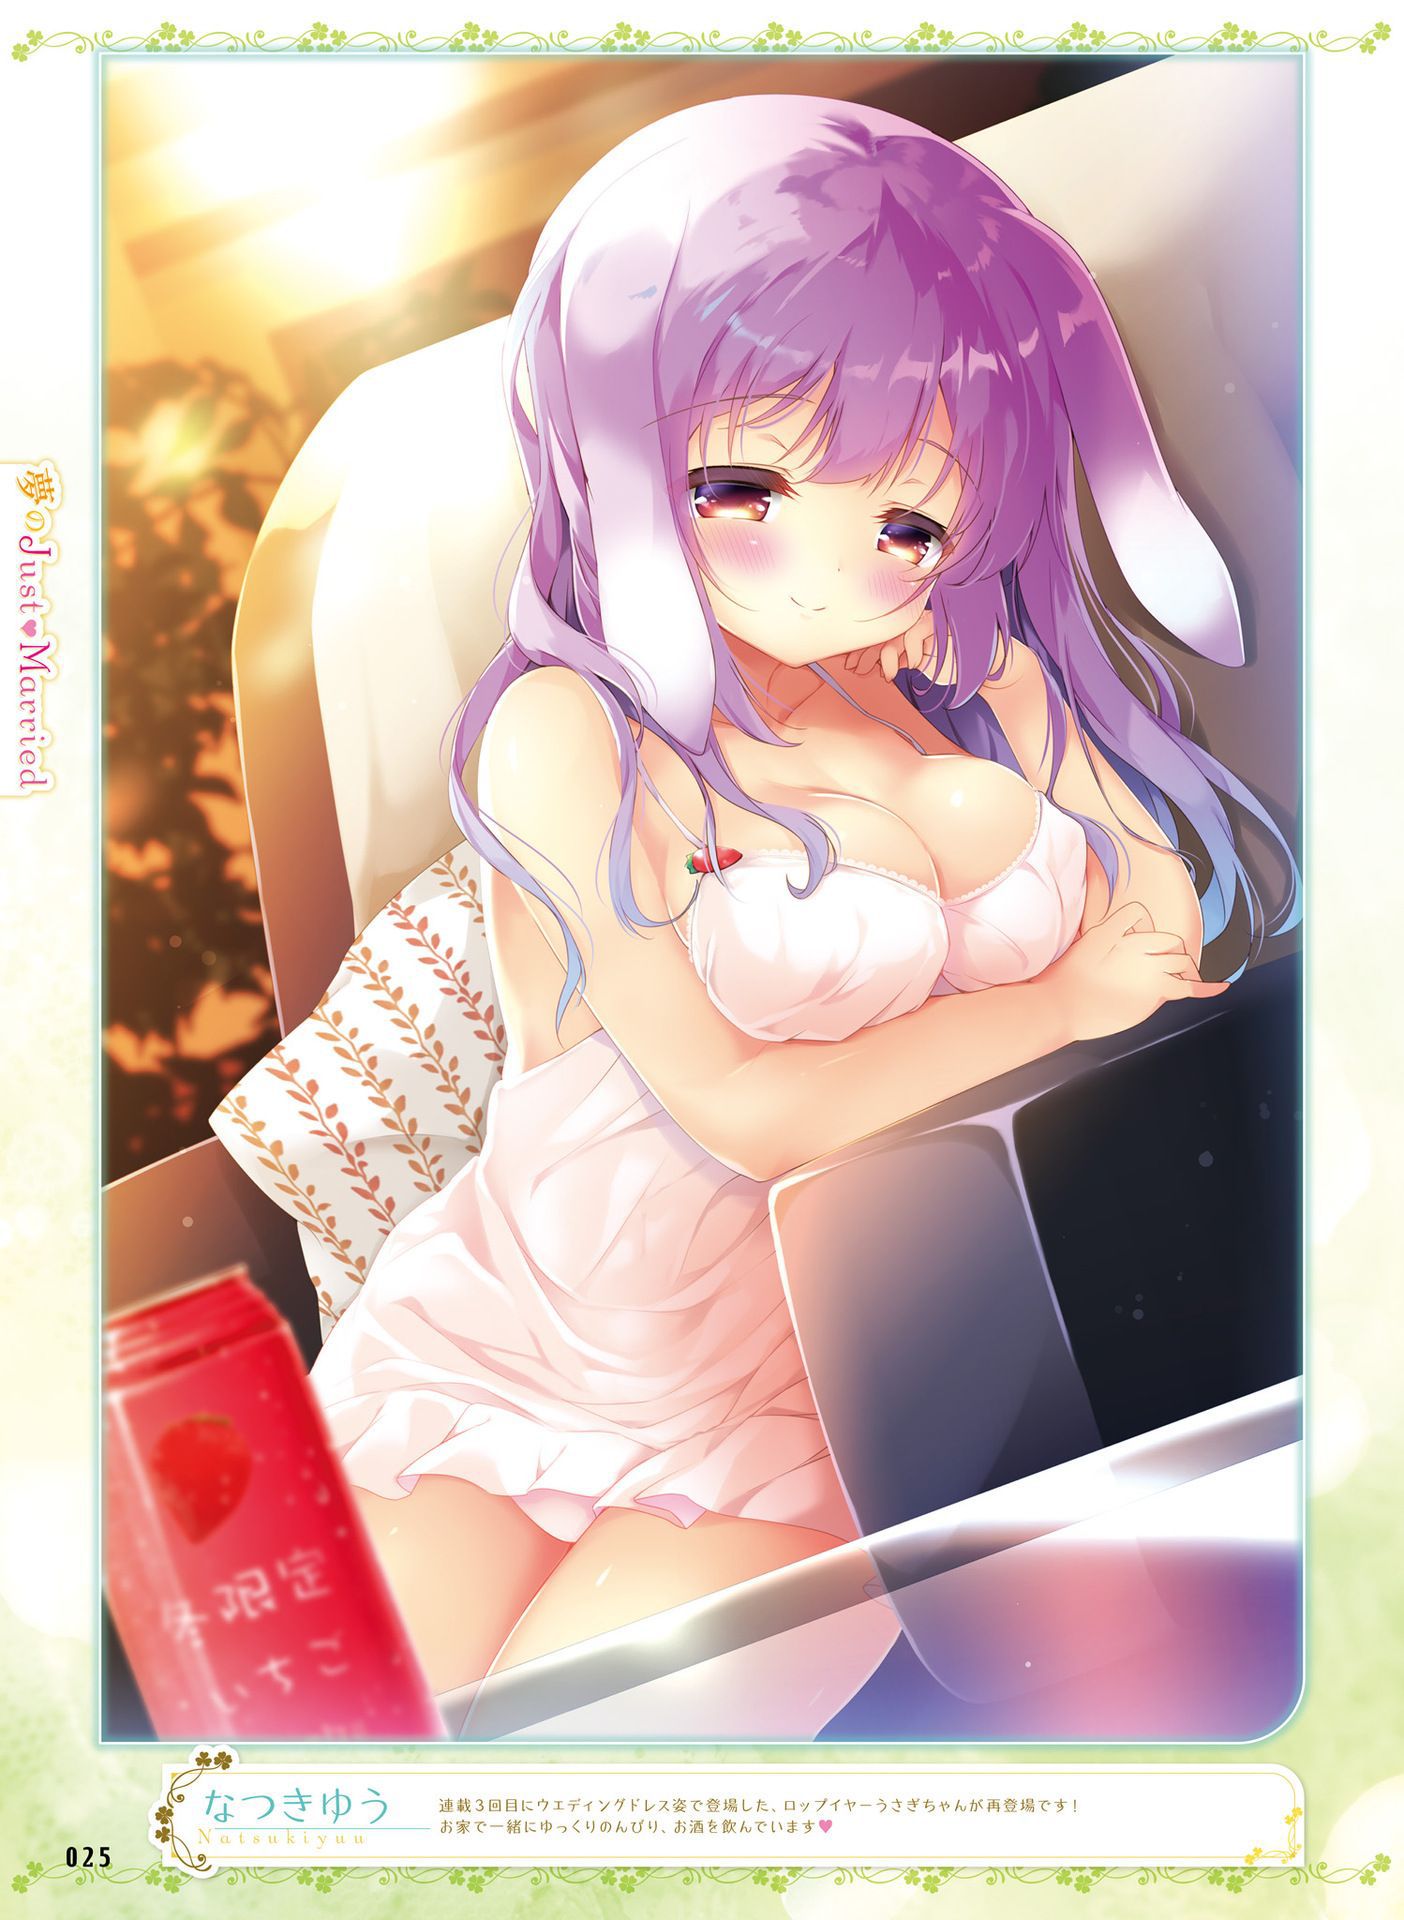 【Erotic Anime Summary】 Valley erotic images of busty beauties 【50 photos】 24